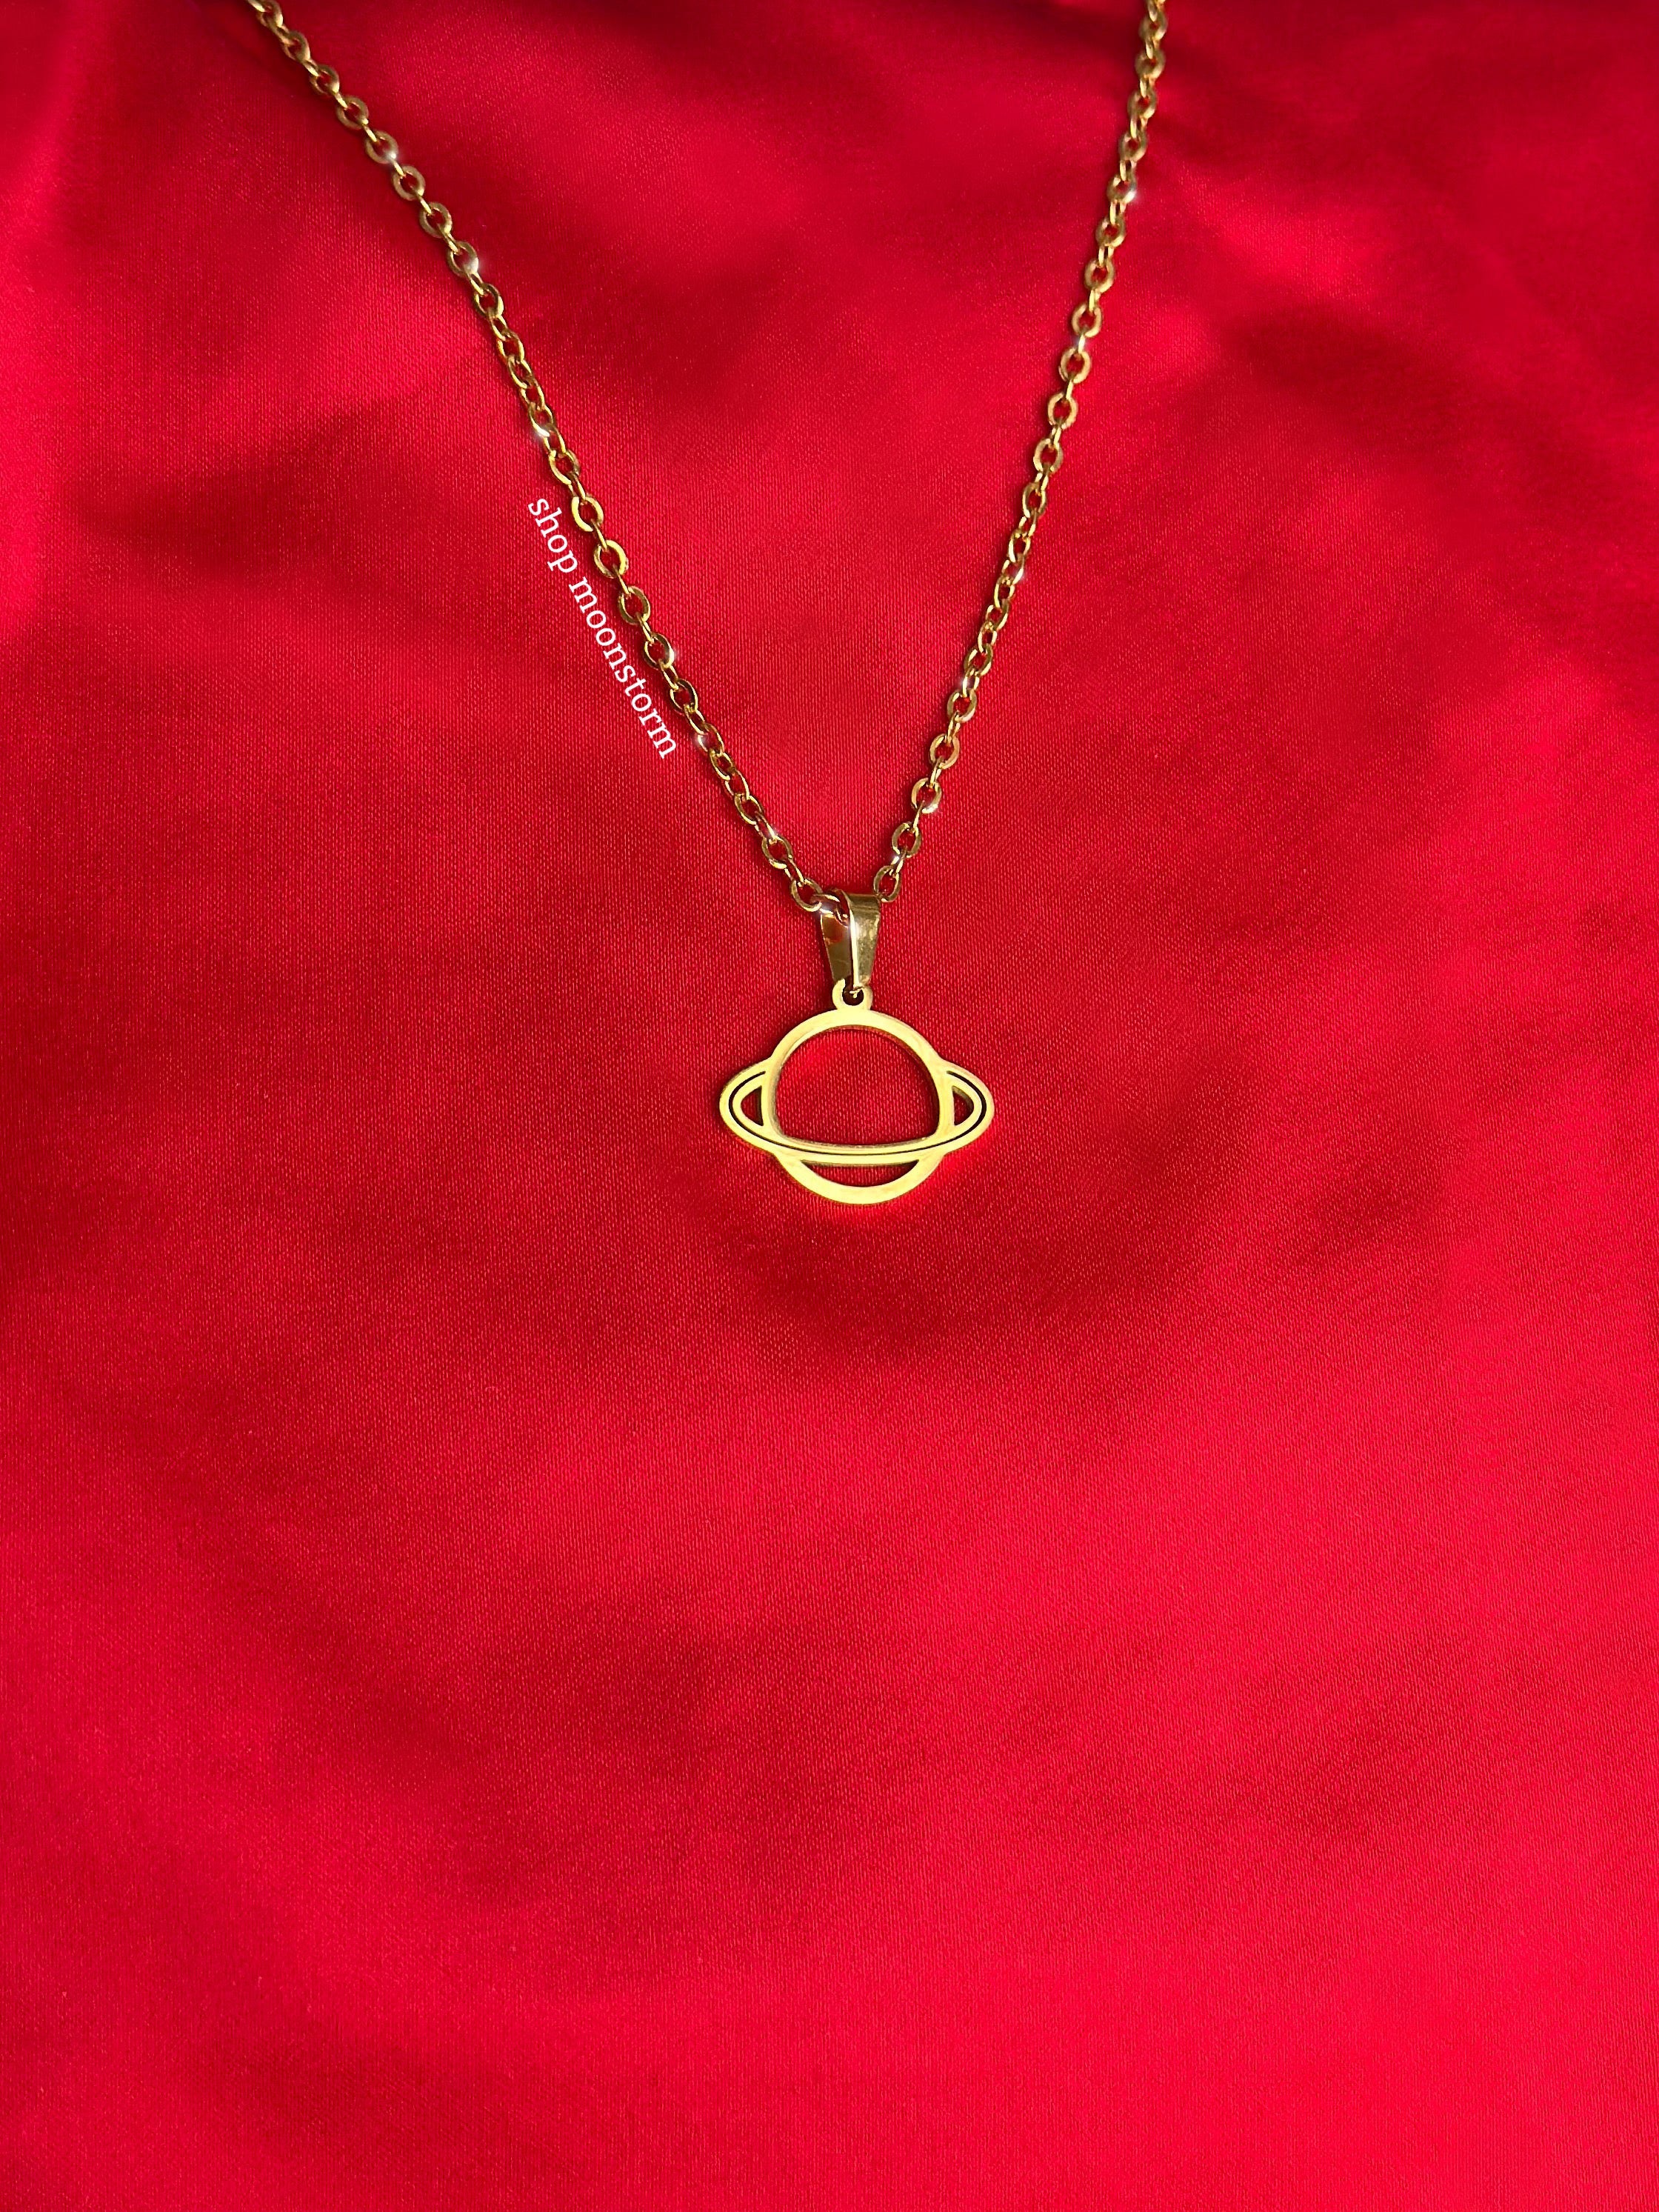 Buy Gold Saturn Necklace, Solar System Necklace, Space Necklace, Milky Way  Online in India - Etsy